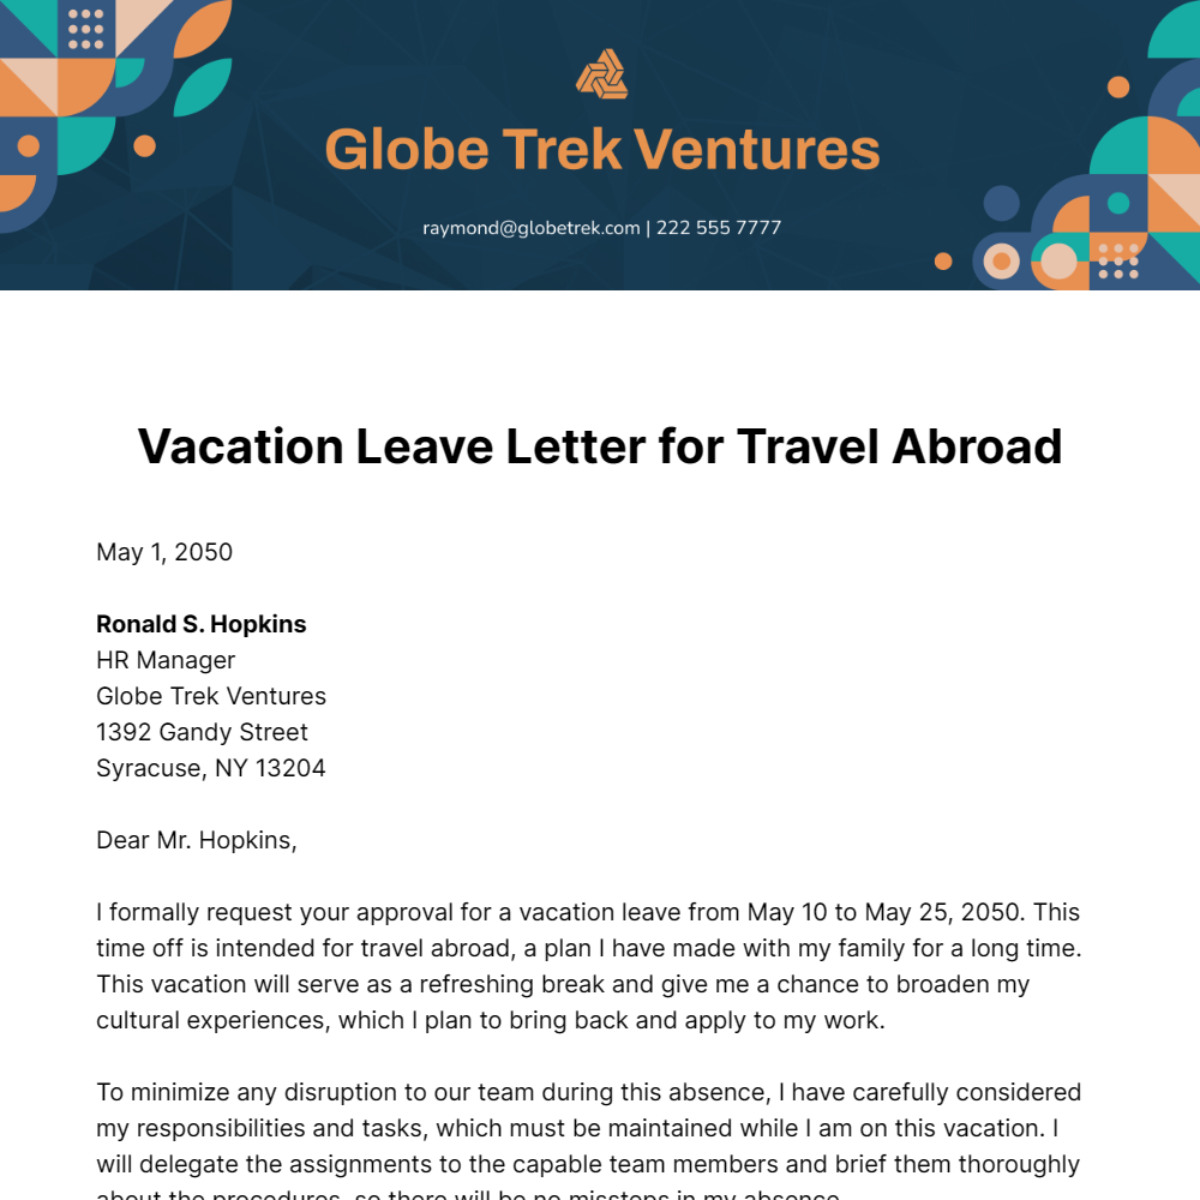 Vacation Leave Letter for Travel Abroad Template